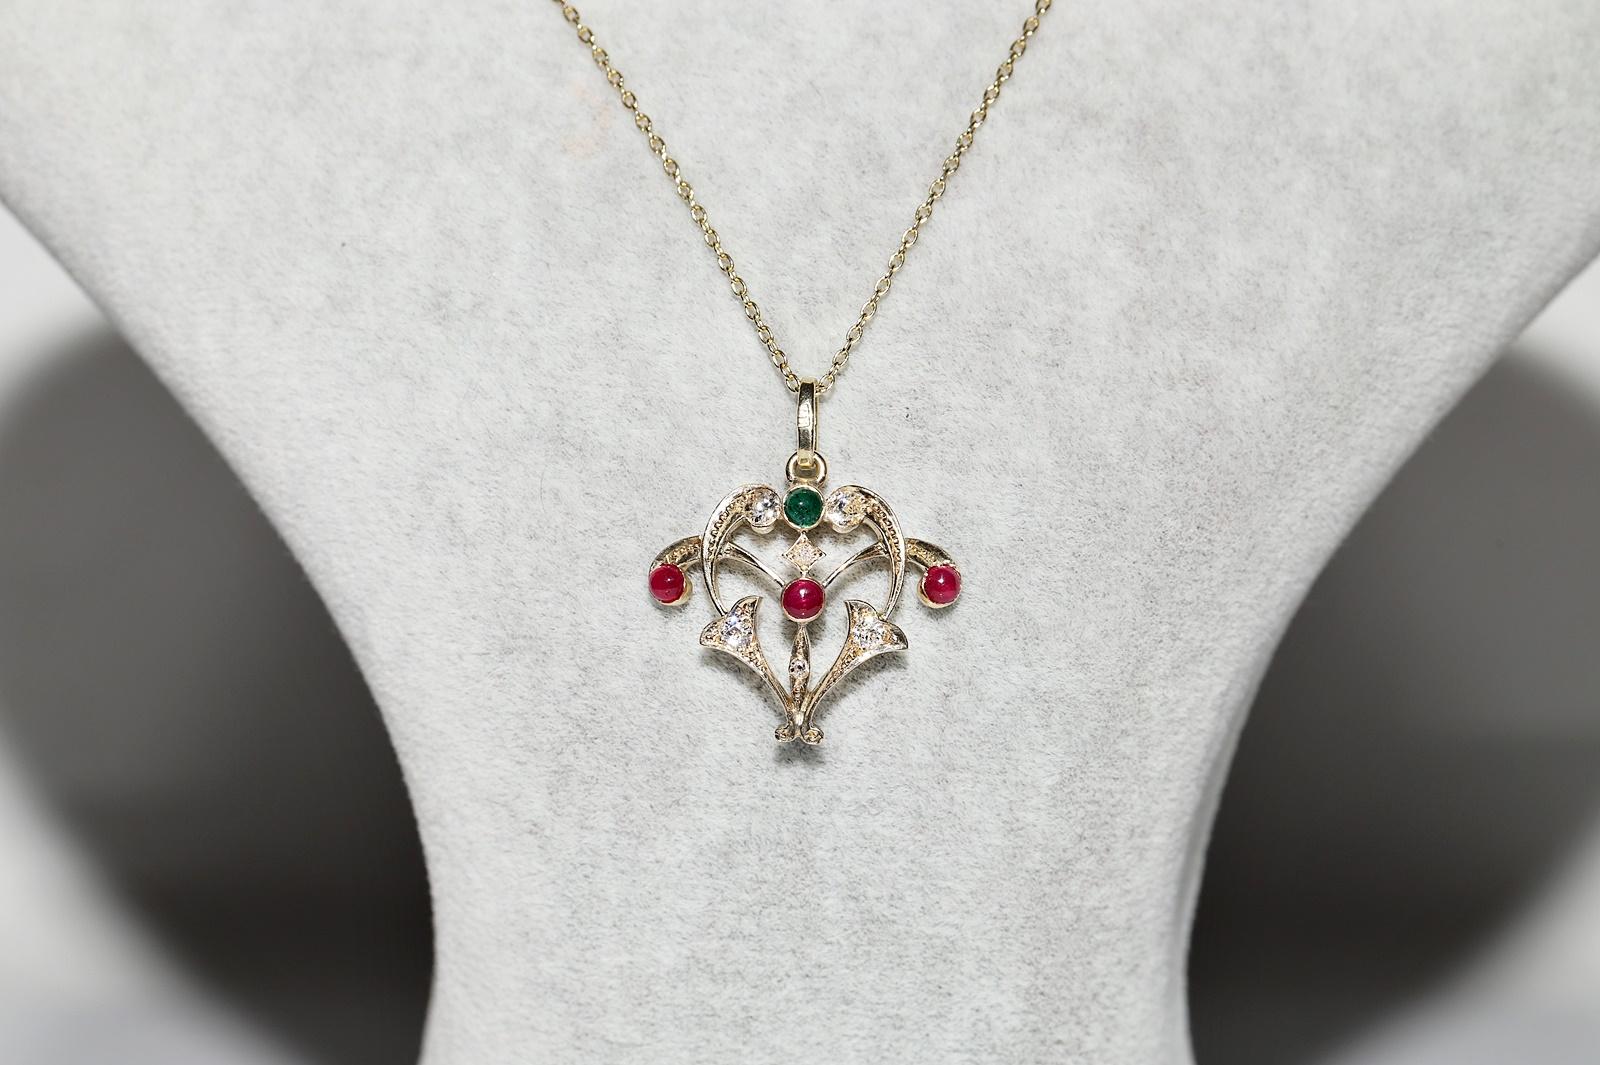 Retro Vintage Circa 1980s 14k Gold Natural Diamond And Emerald Ruby Pendant Necklace For Sale